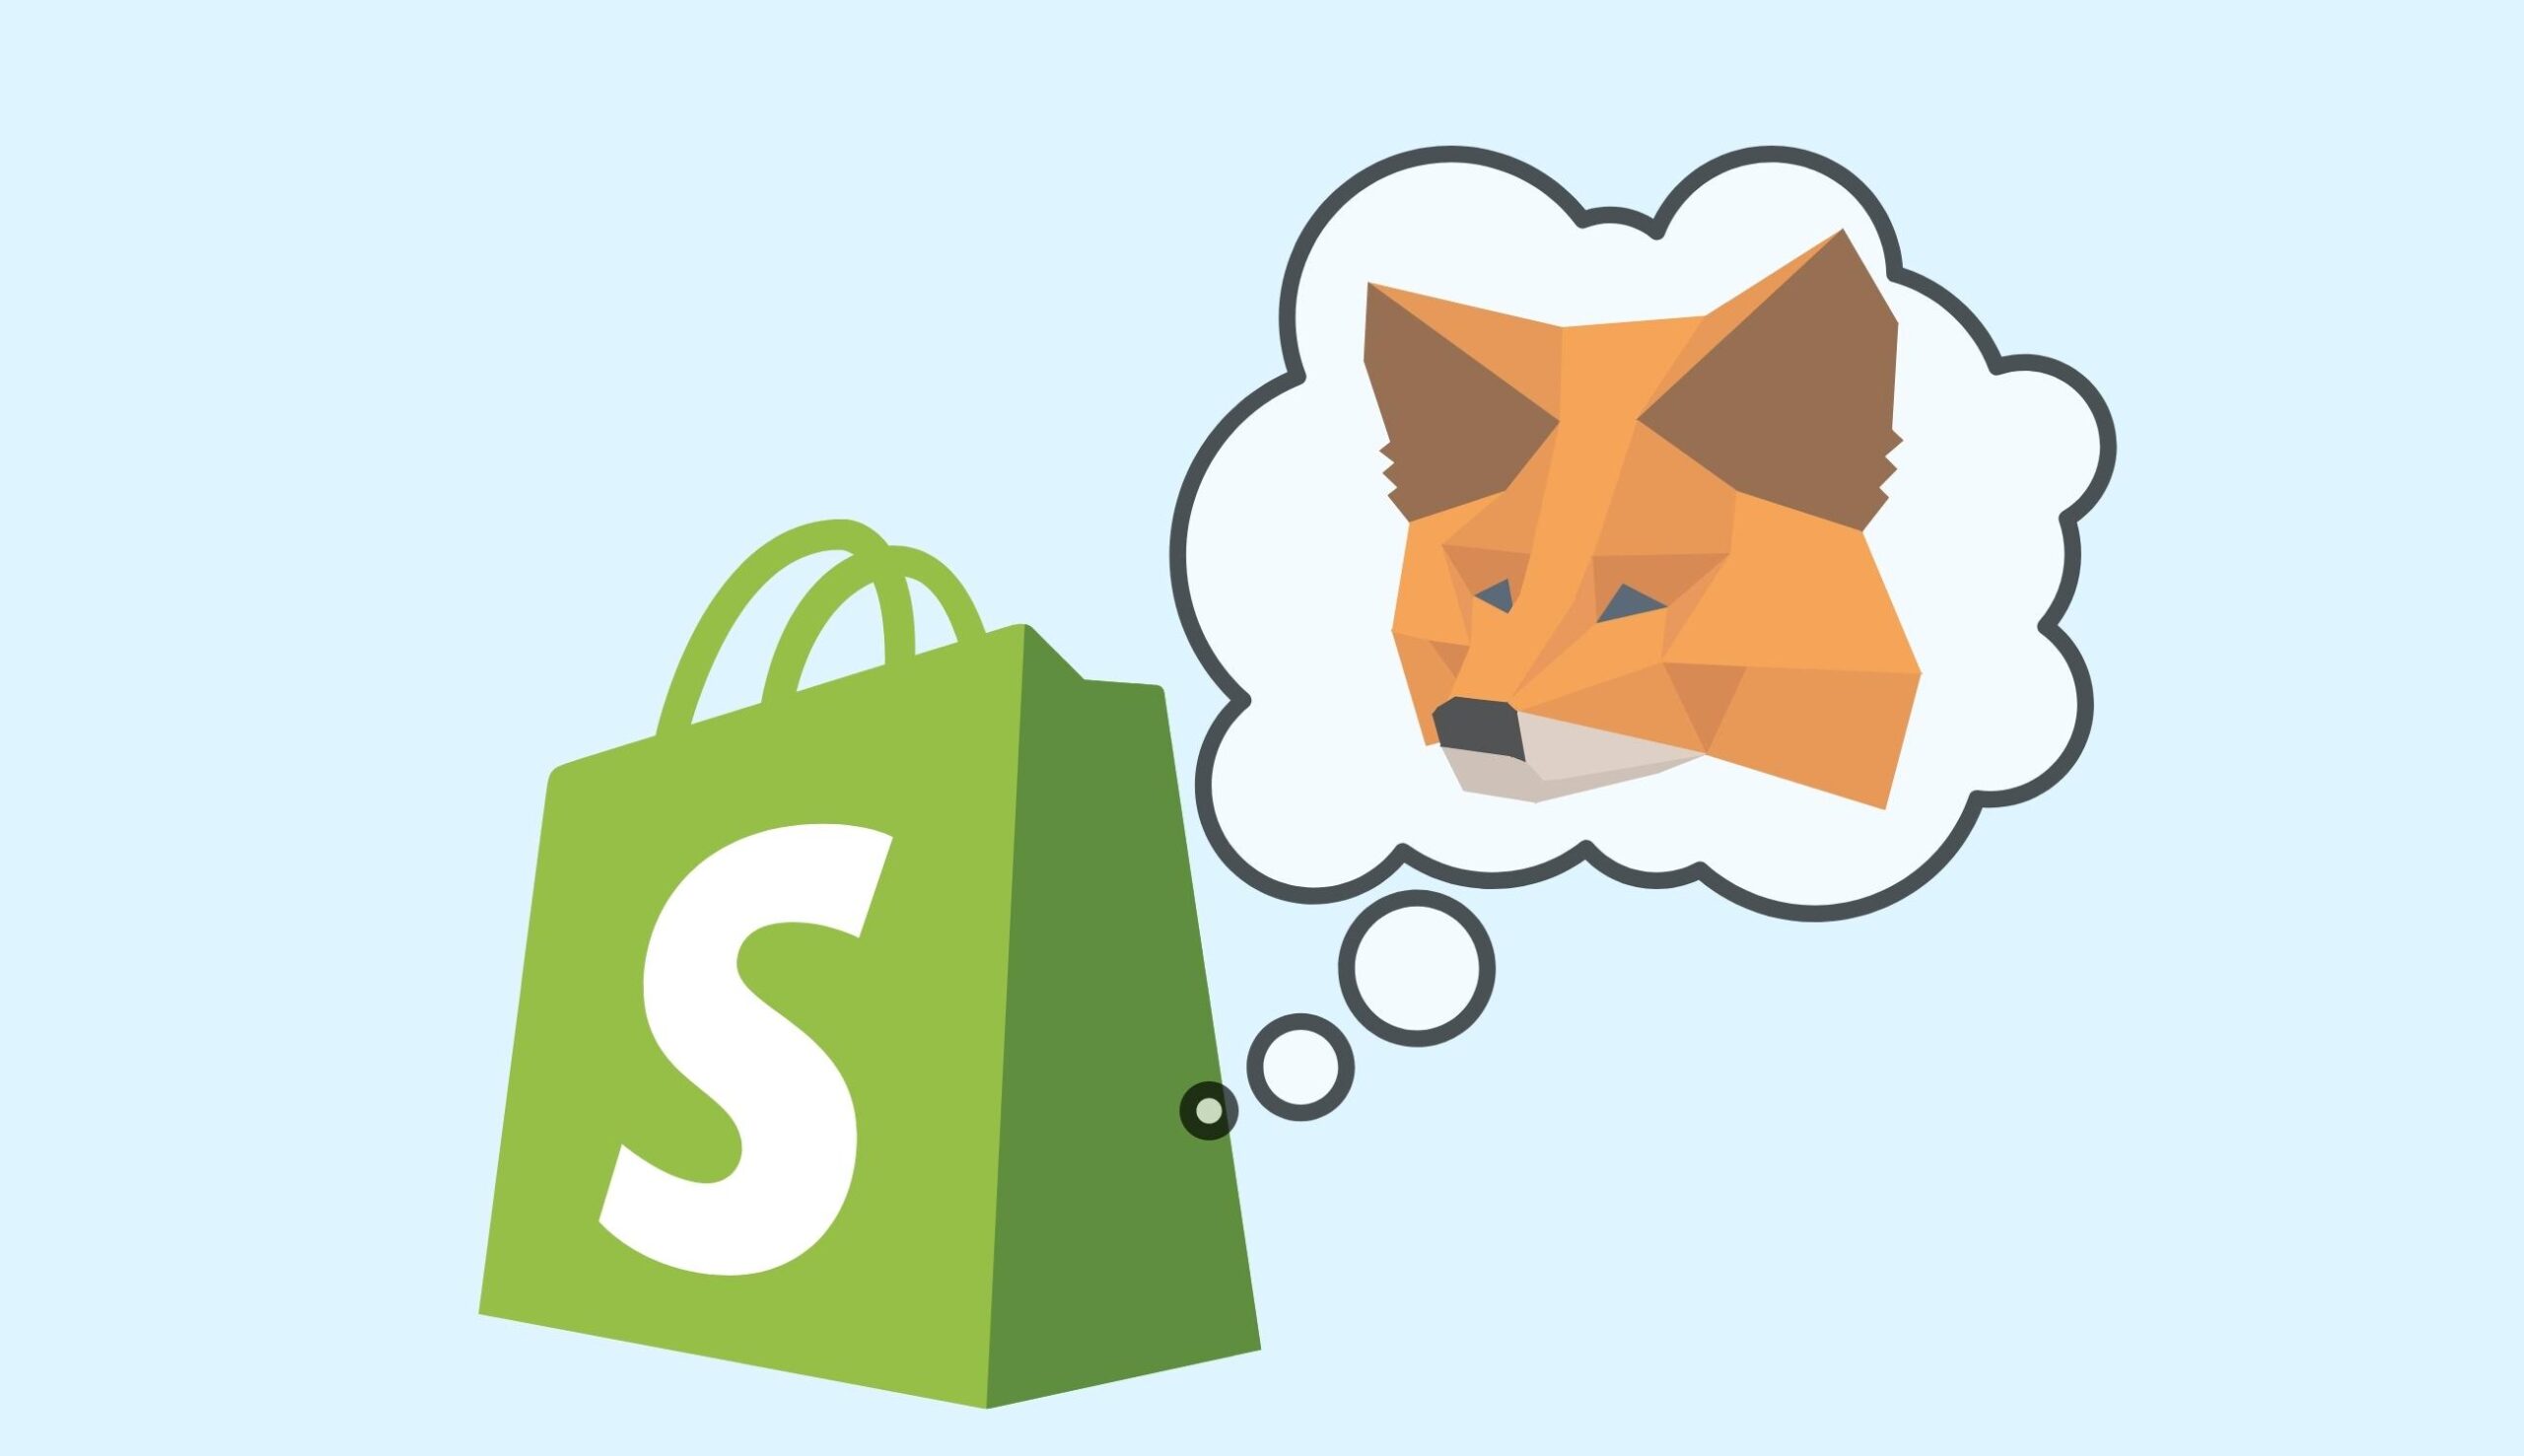 metamask and shopify